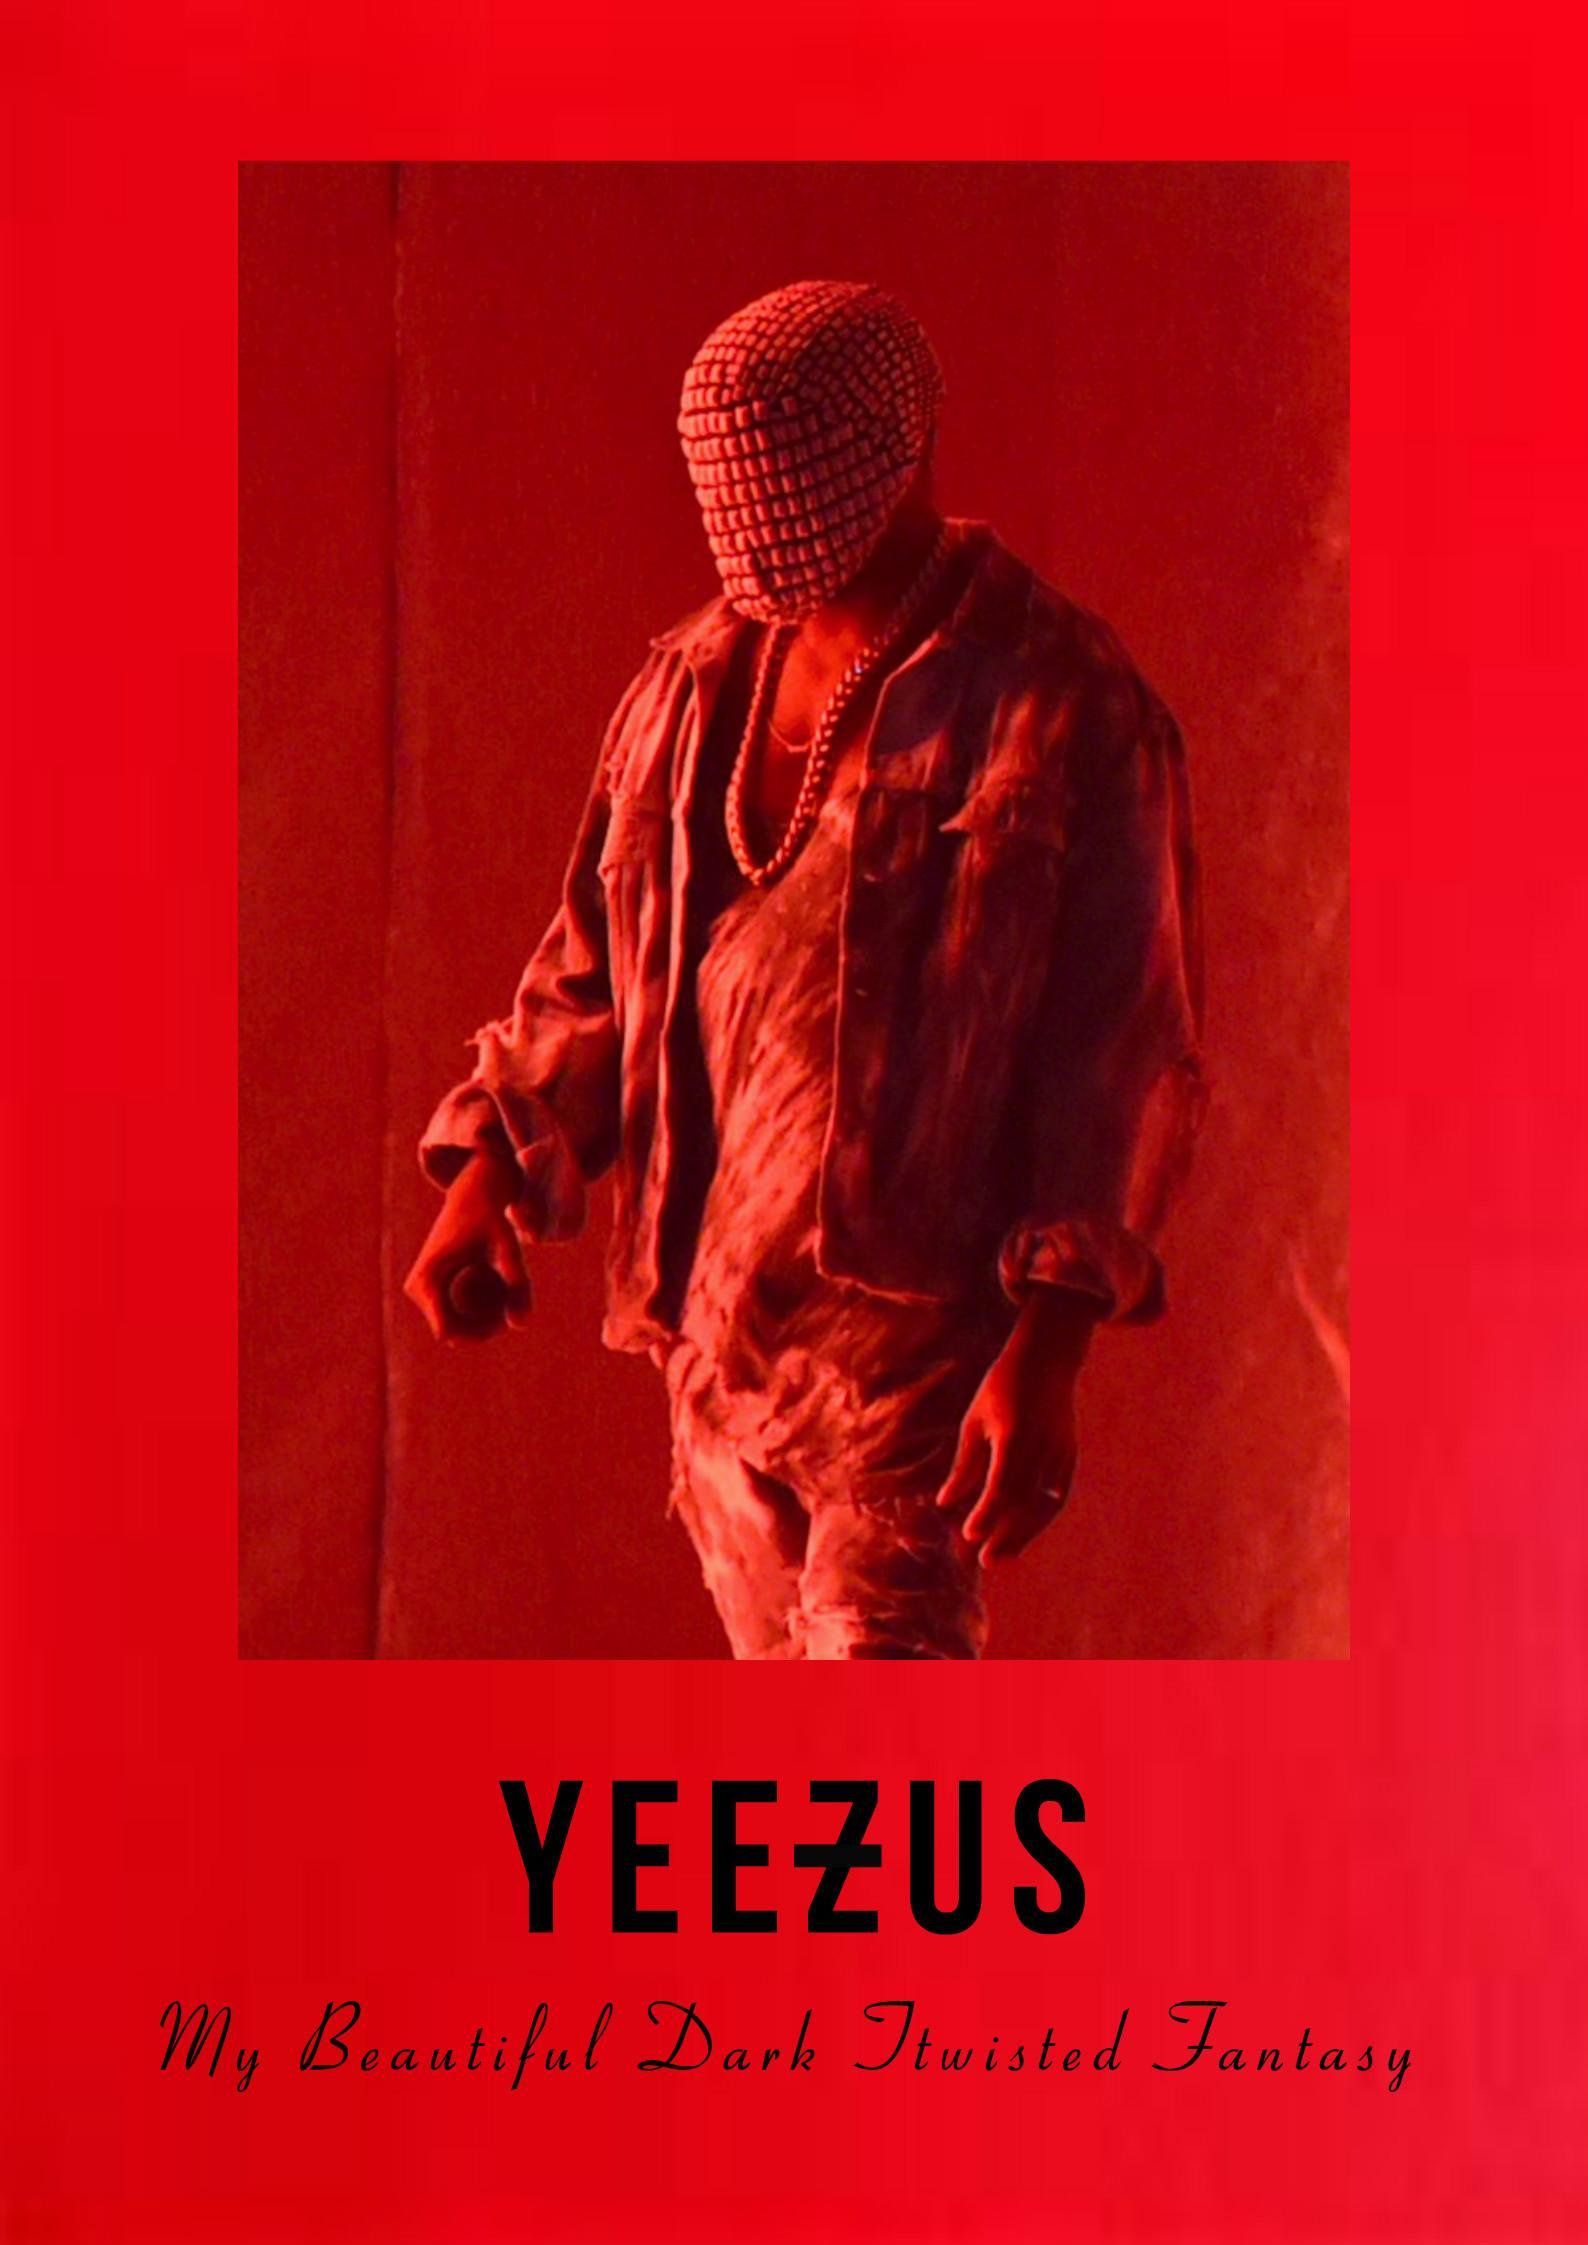 Mbdtf Poster iPhone Wallpaper I Made Thought You Guys Would